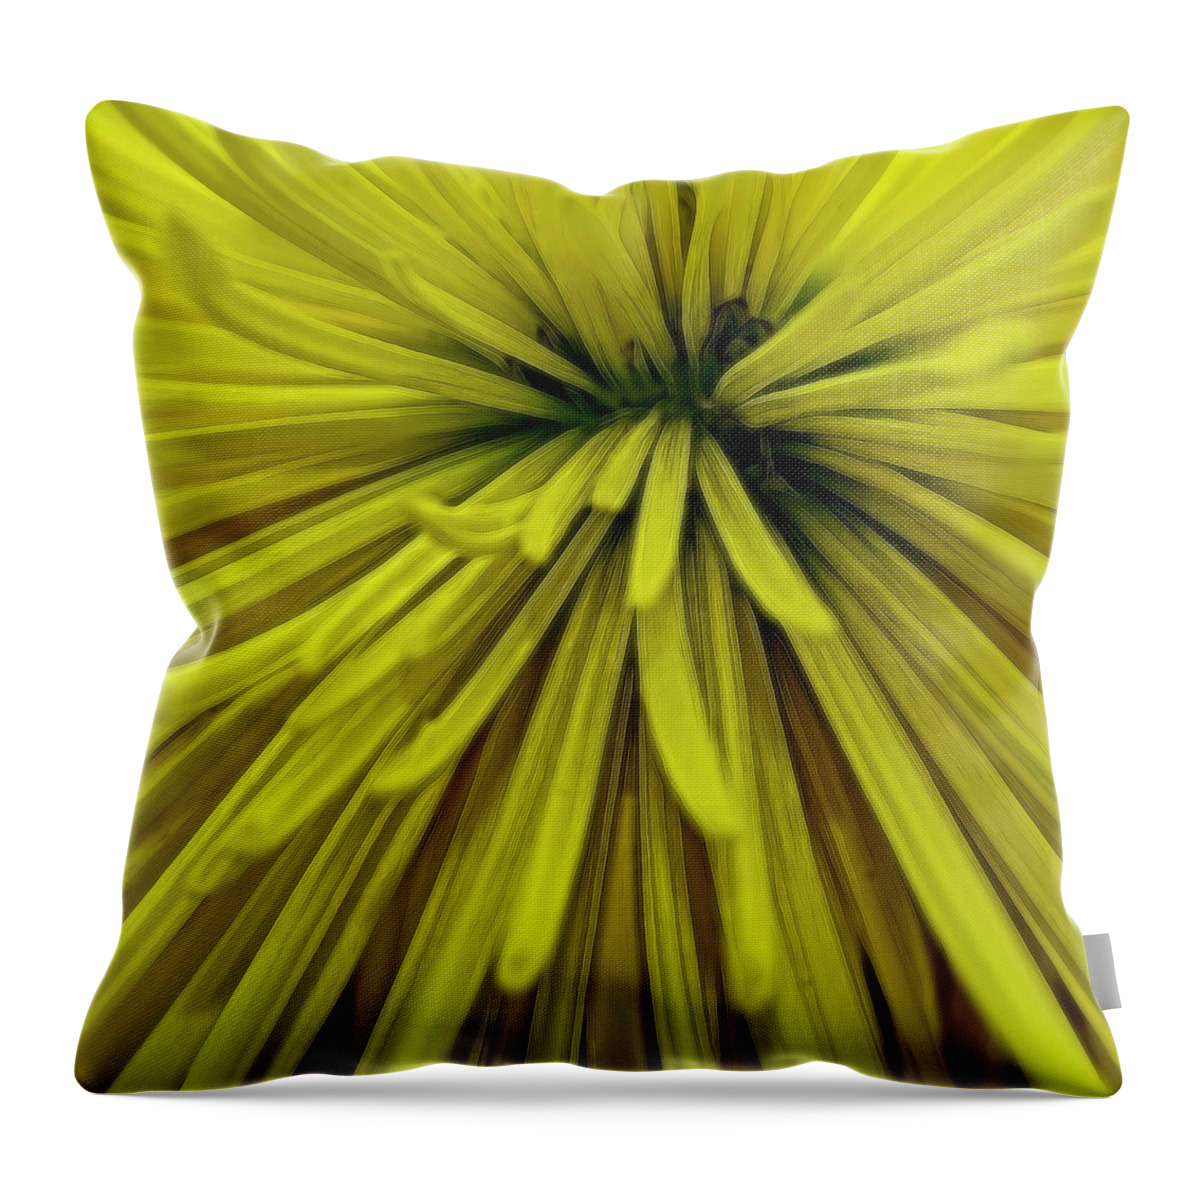 Flower Throw Pillow featuring the photograph Spider Mum 3983 by Cathy Kovarik